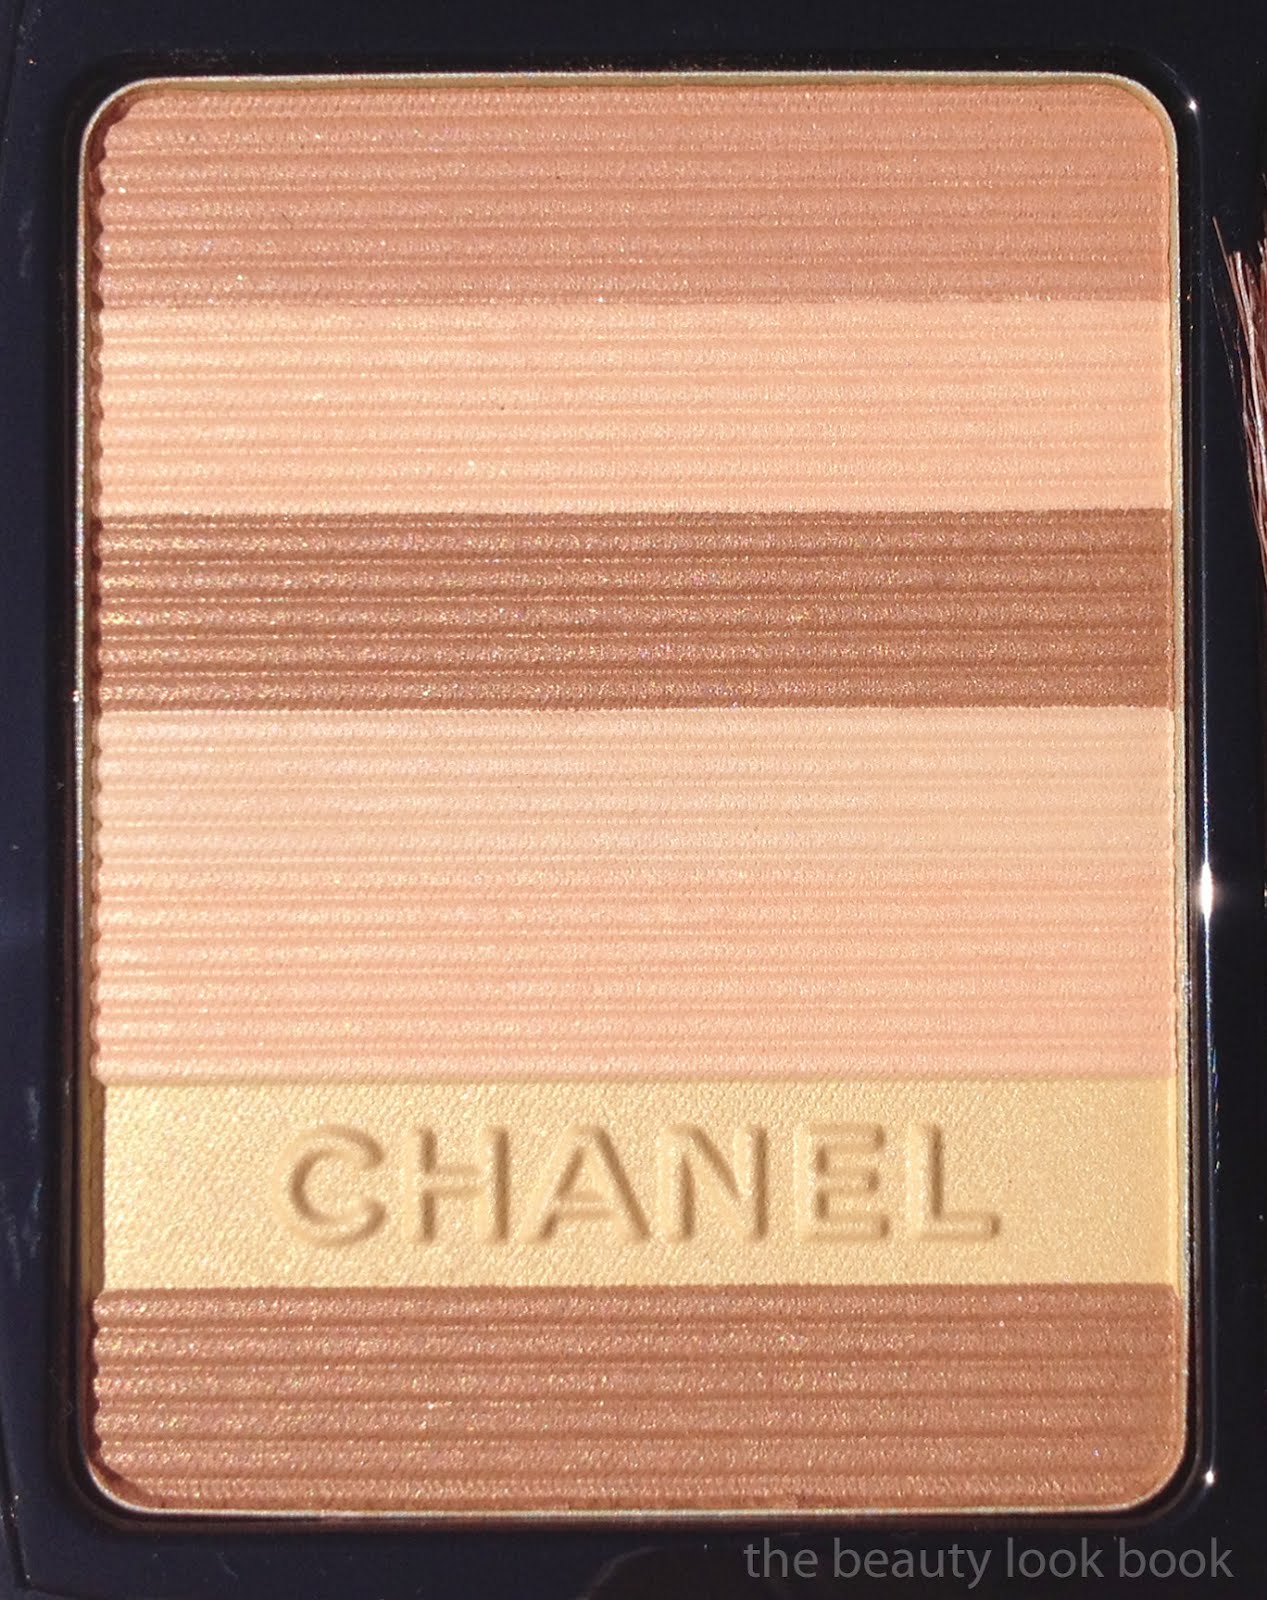 Chanel Sable Beige and Sable Rose Soleil Tan de Chanel Bronzers